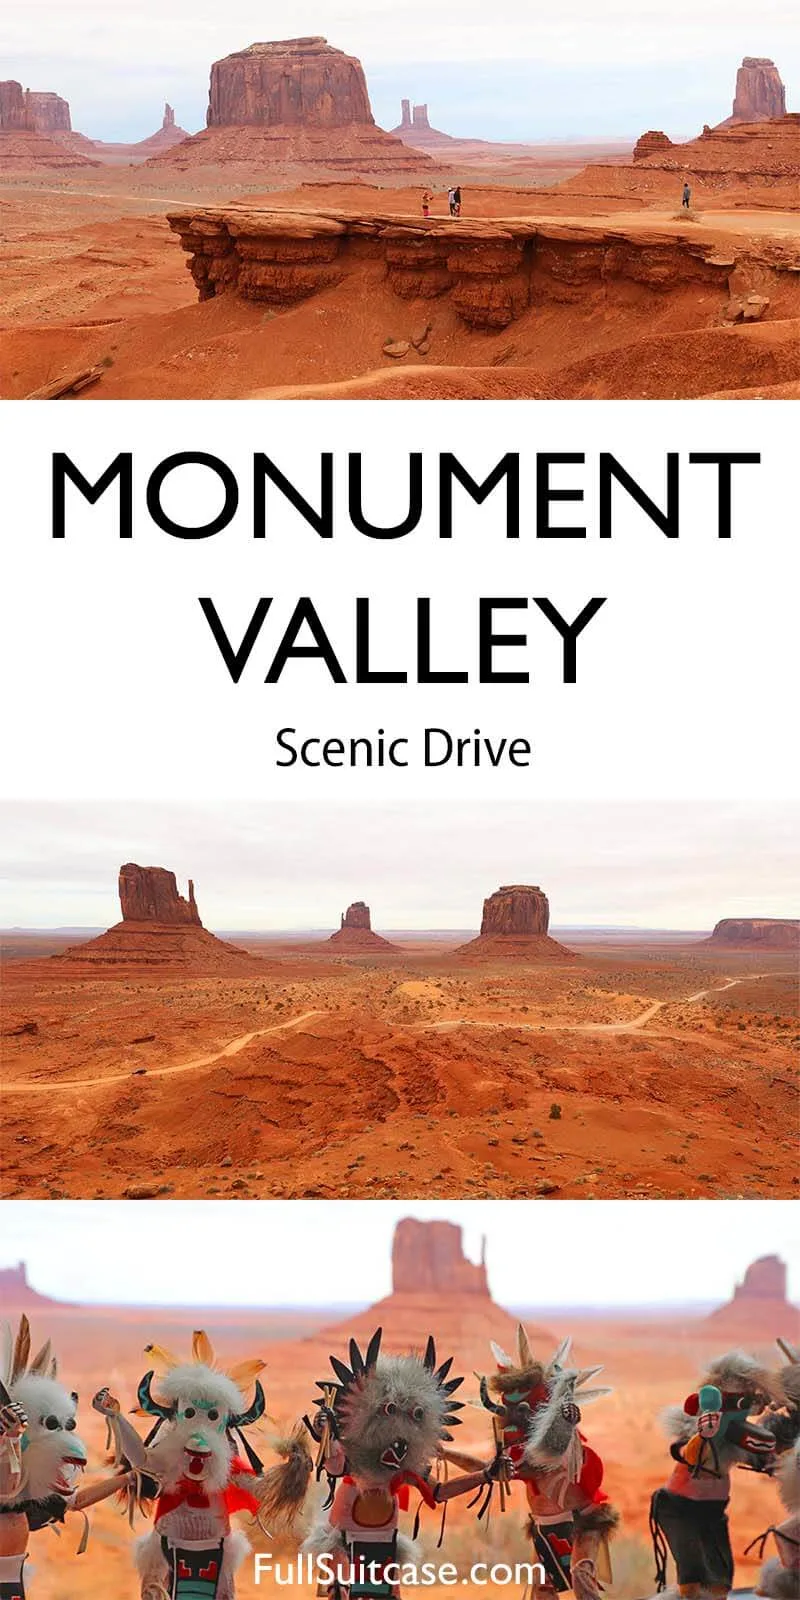 Complete guide to Monument Valley Scenic Drive